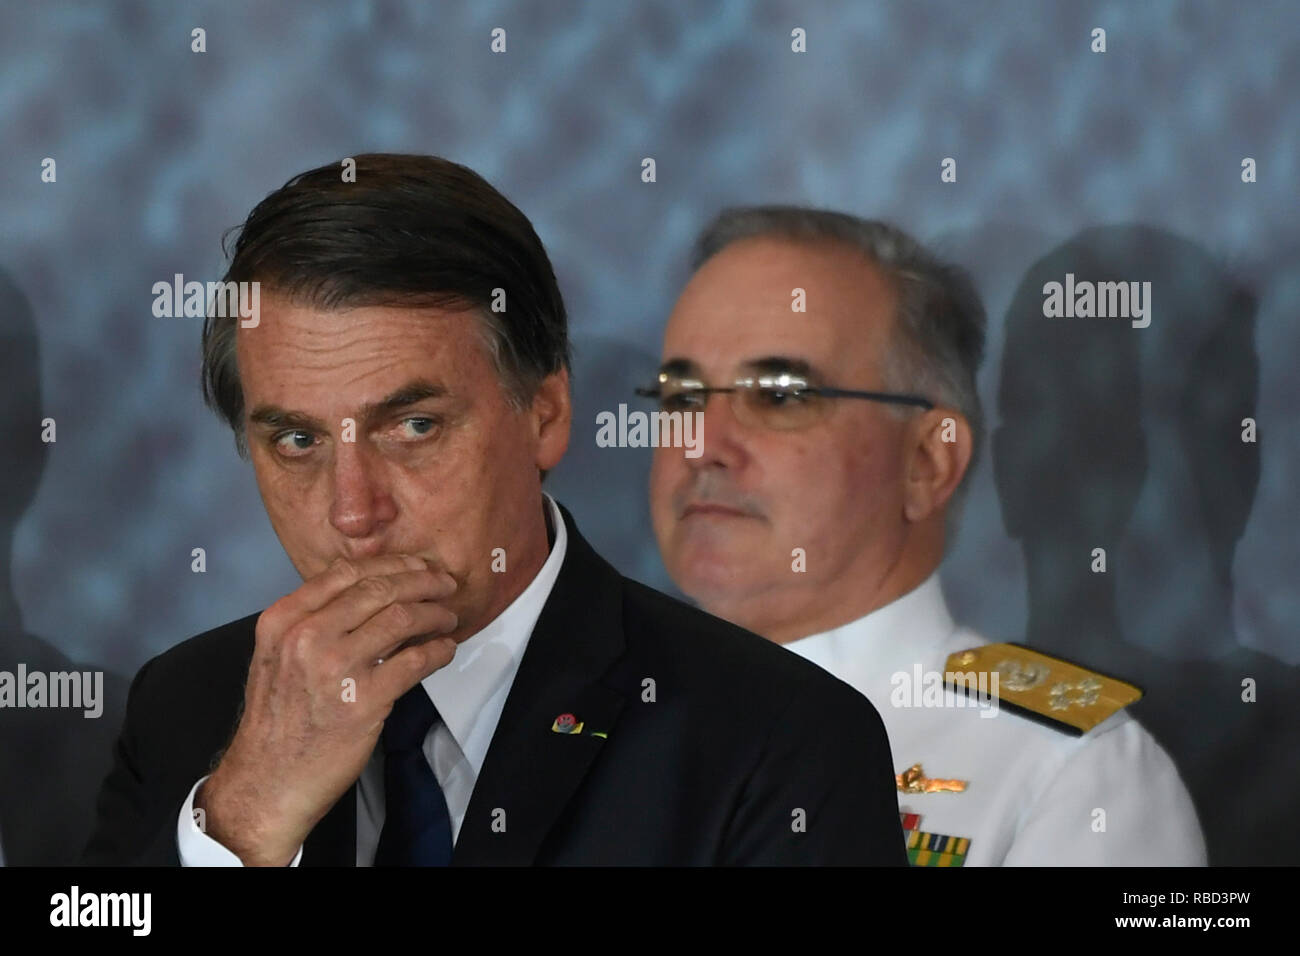 Brasilia, Brazil. 09th Jan, 2019. DF - Brasilia - 09/01/2019 - Possession of the General Commander of the Navy - Jair Bolsonaro, President of the Republic, during the inauguration this Tuesday, January 9, of Ilques Barbosa Junior as Commander General of the Navy in a ceremony held at the Clube Naval . Photo: Mateus Bonomi/AGIF Credit: AGIF/Alamy Live News Stock Photo